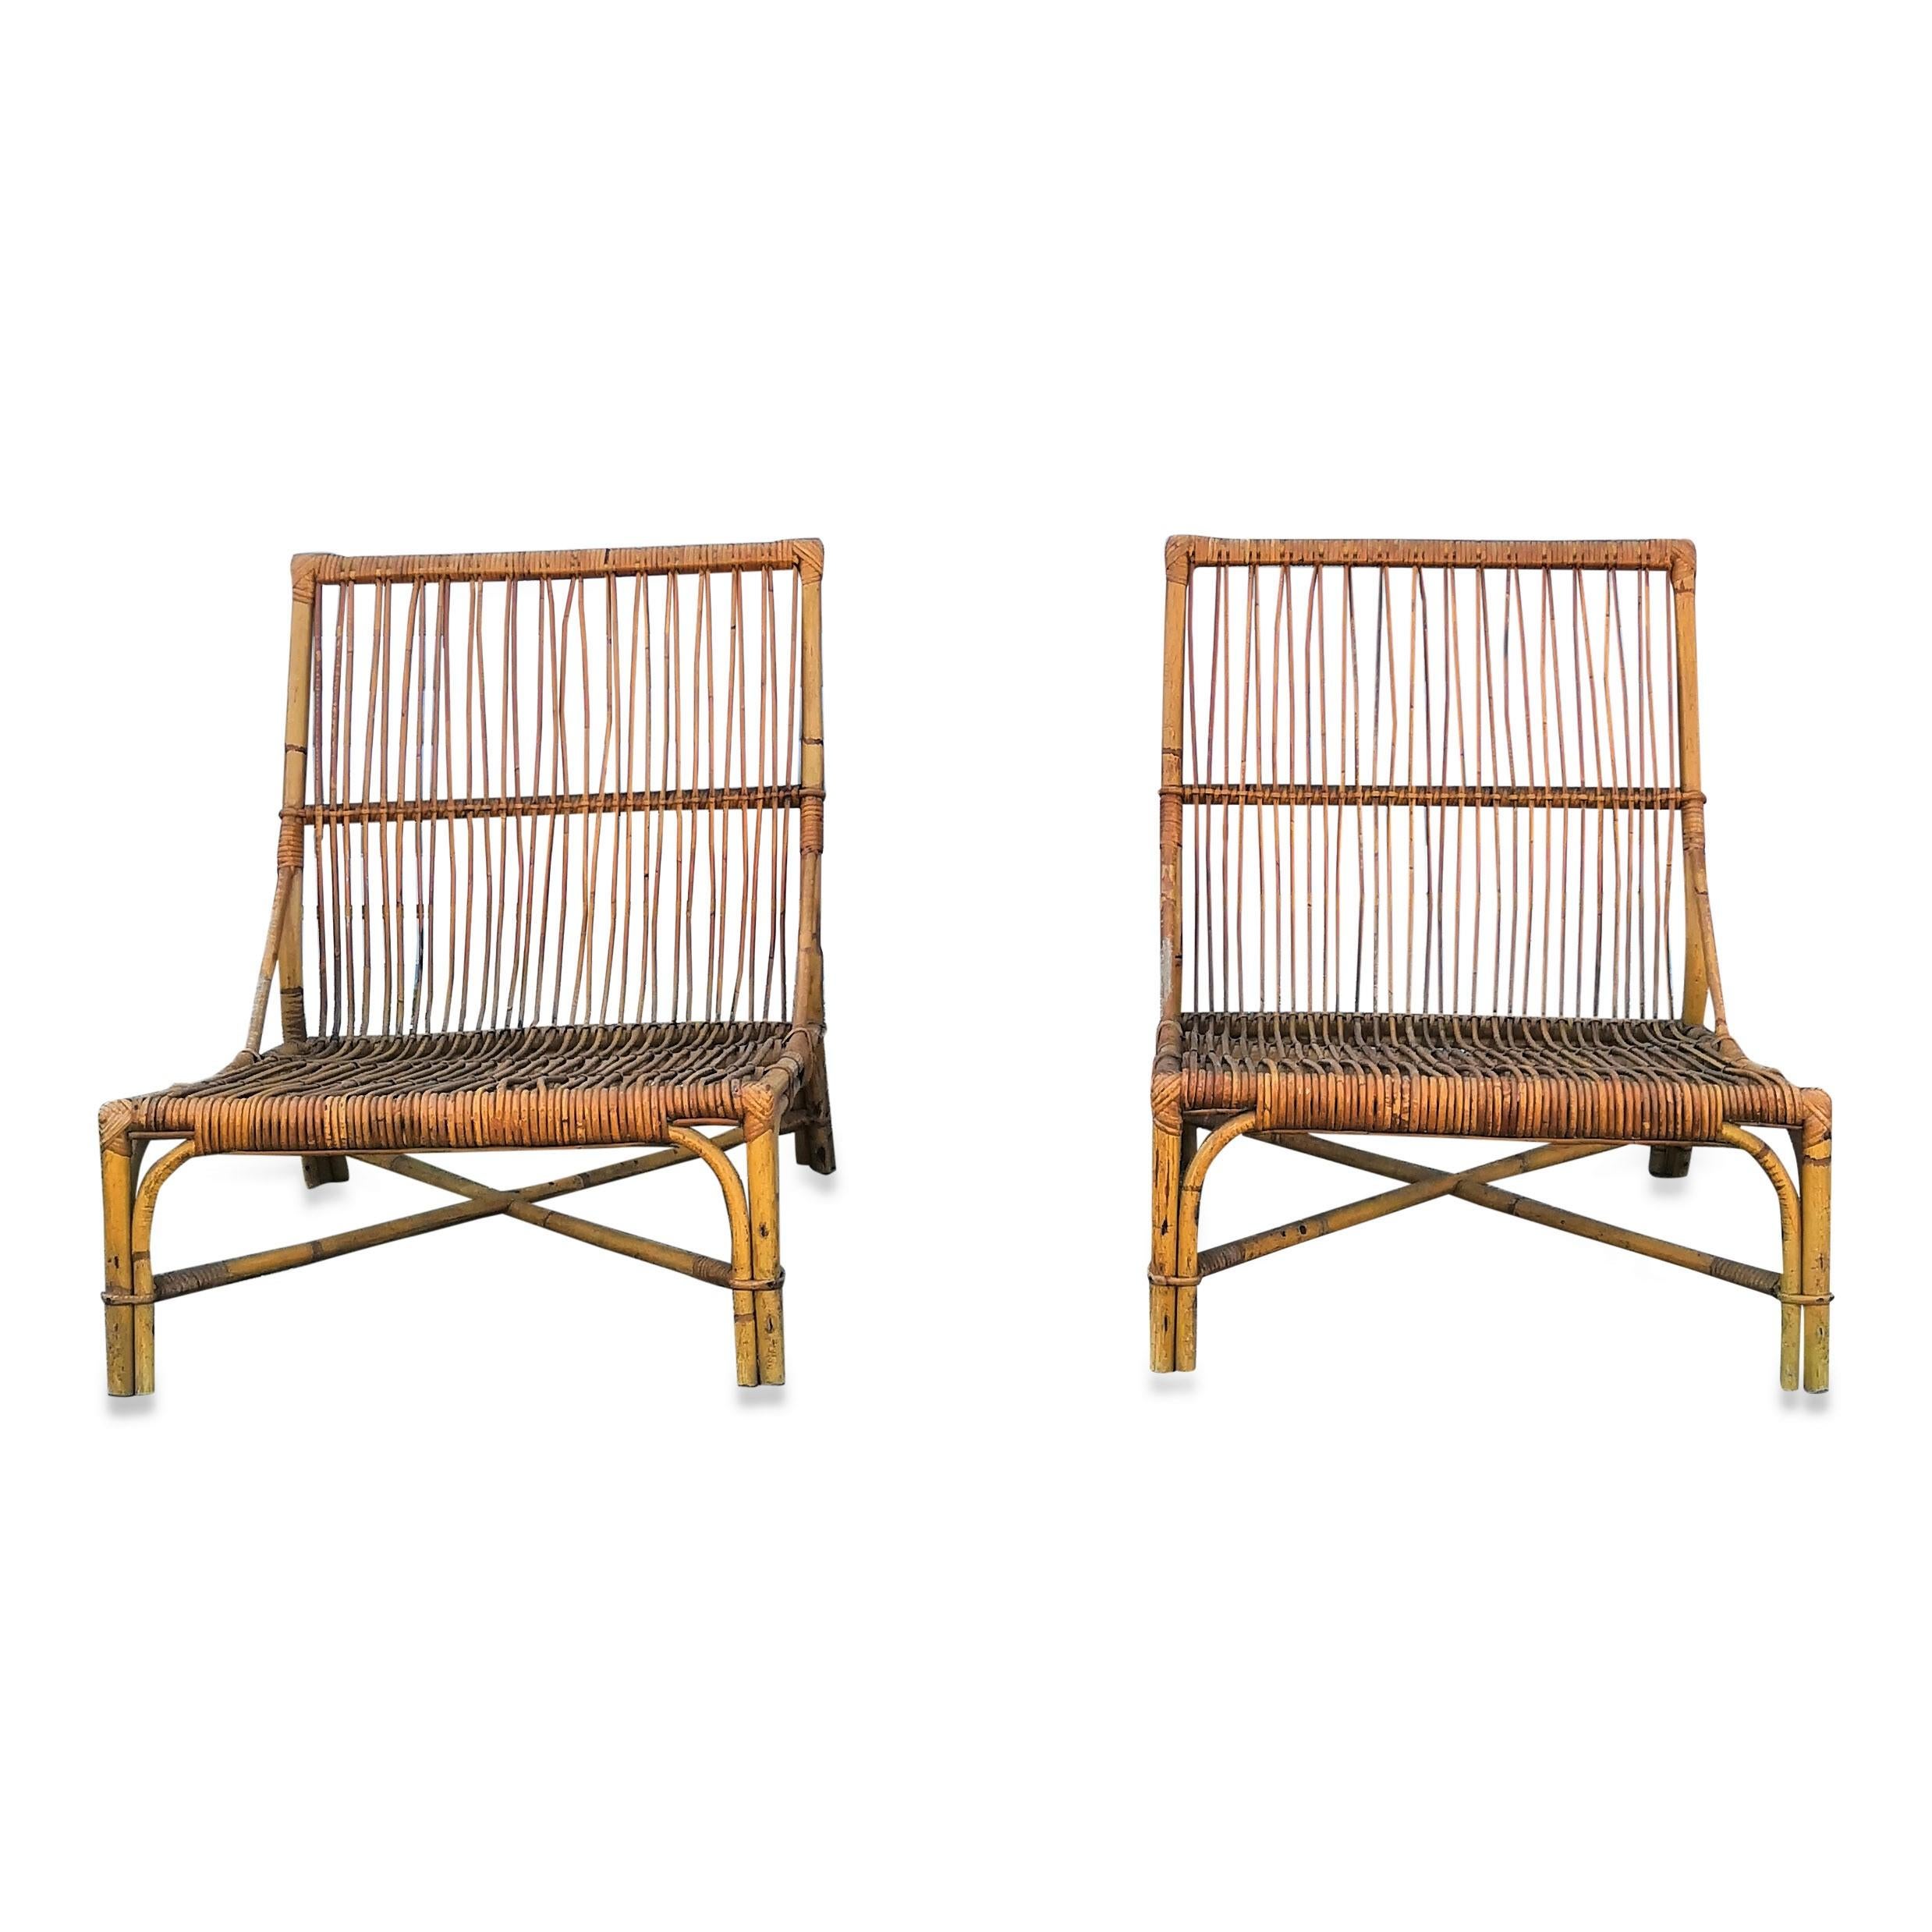 French Rare Pair of Rattan Lounge Chairs by Audoux Minnet, France, 1950s